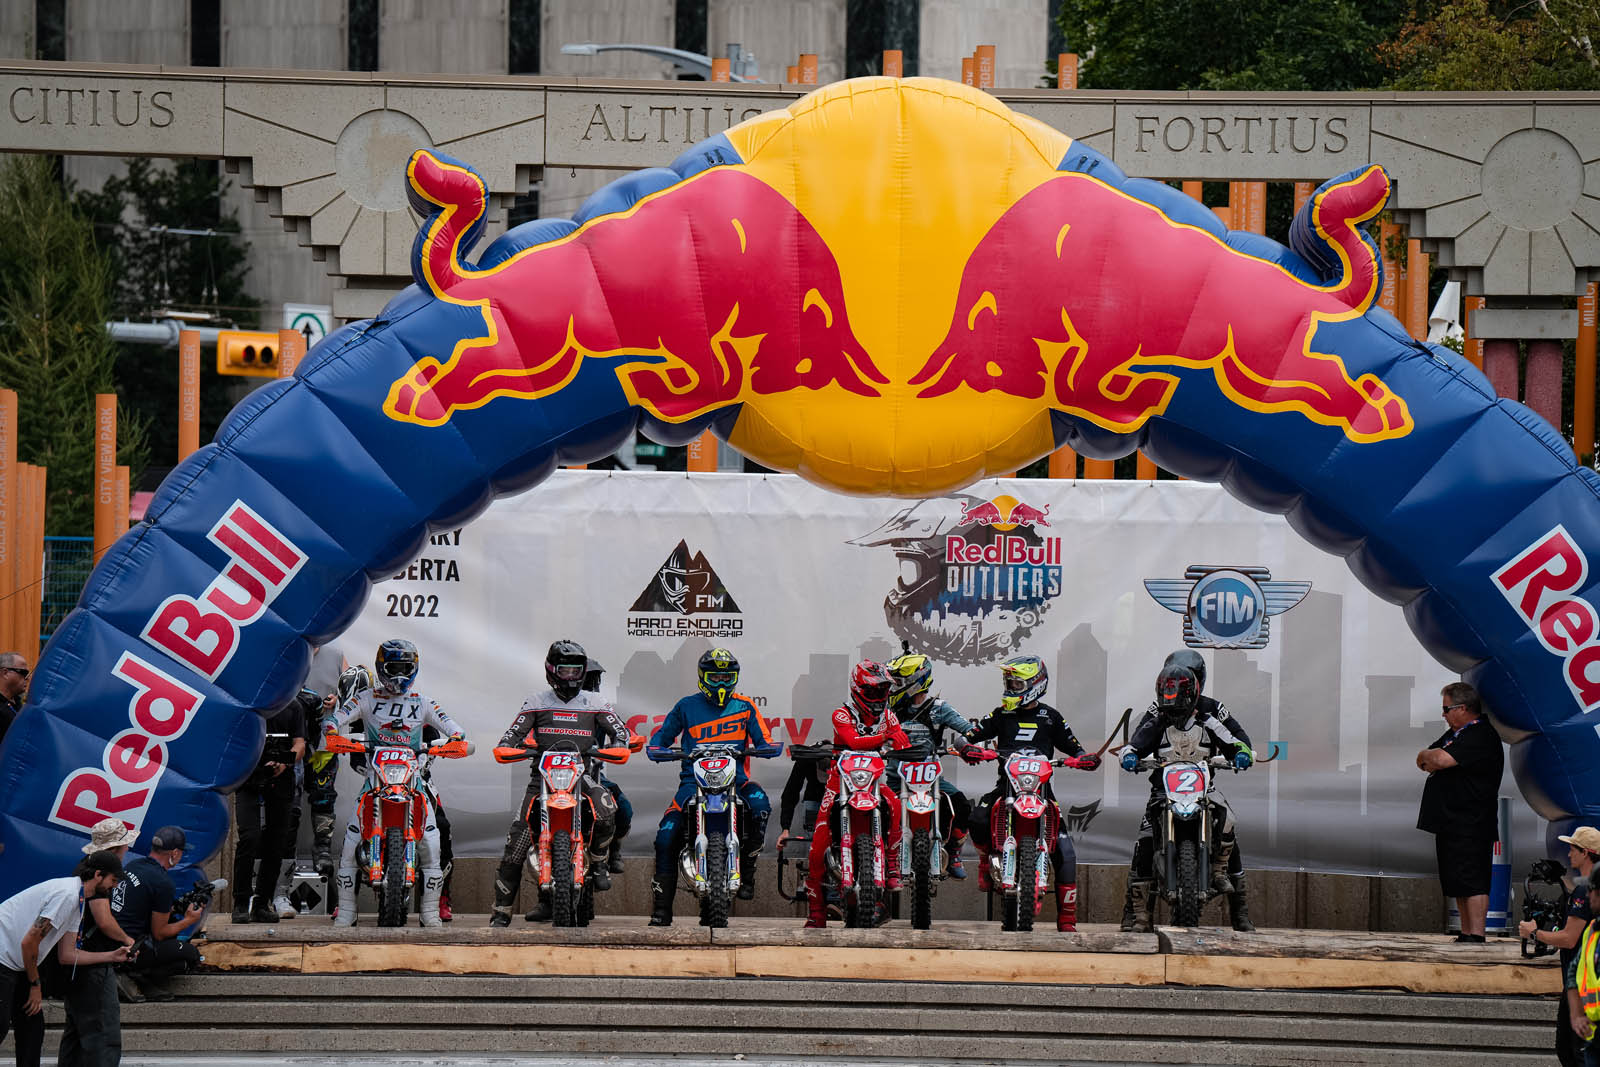 F7M_220827_Red-Bull-Outliers_0020